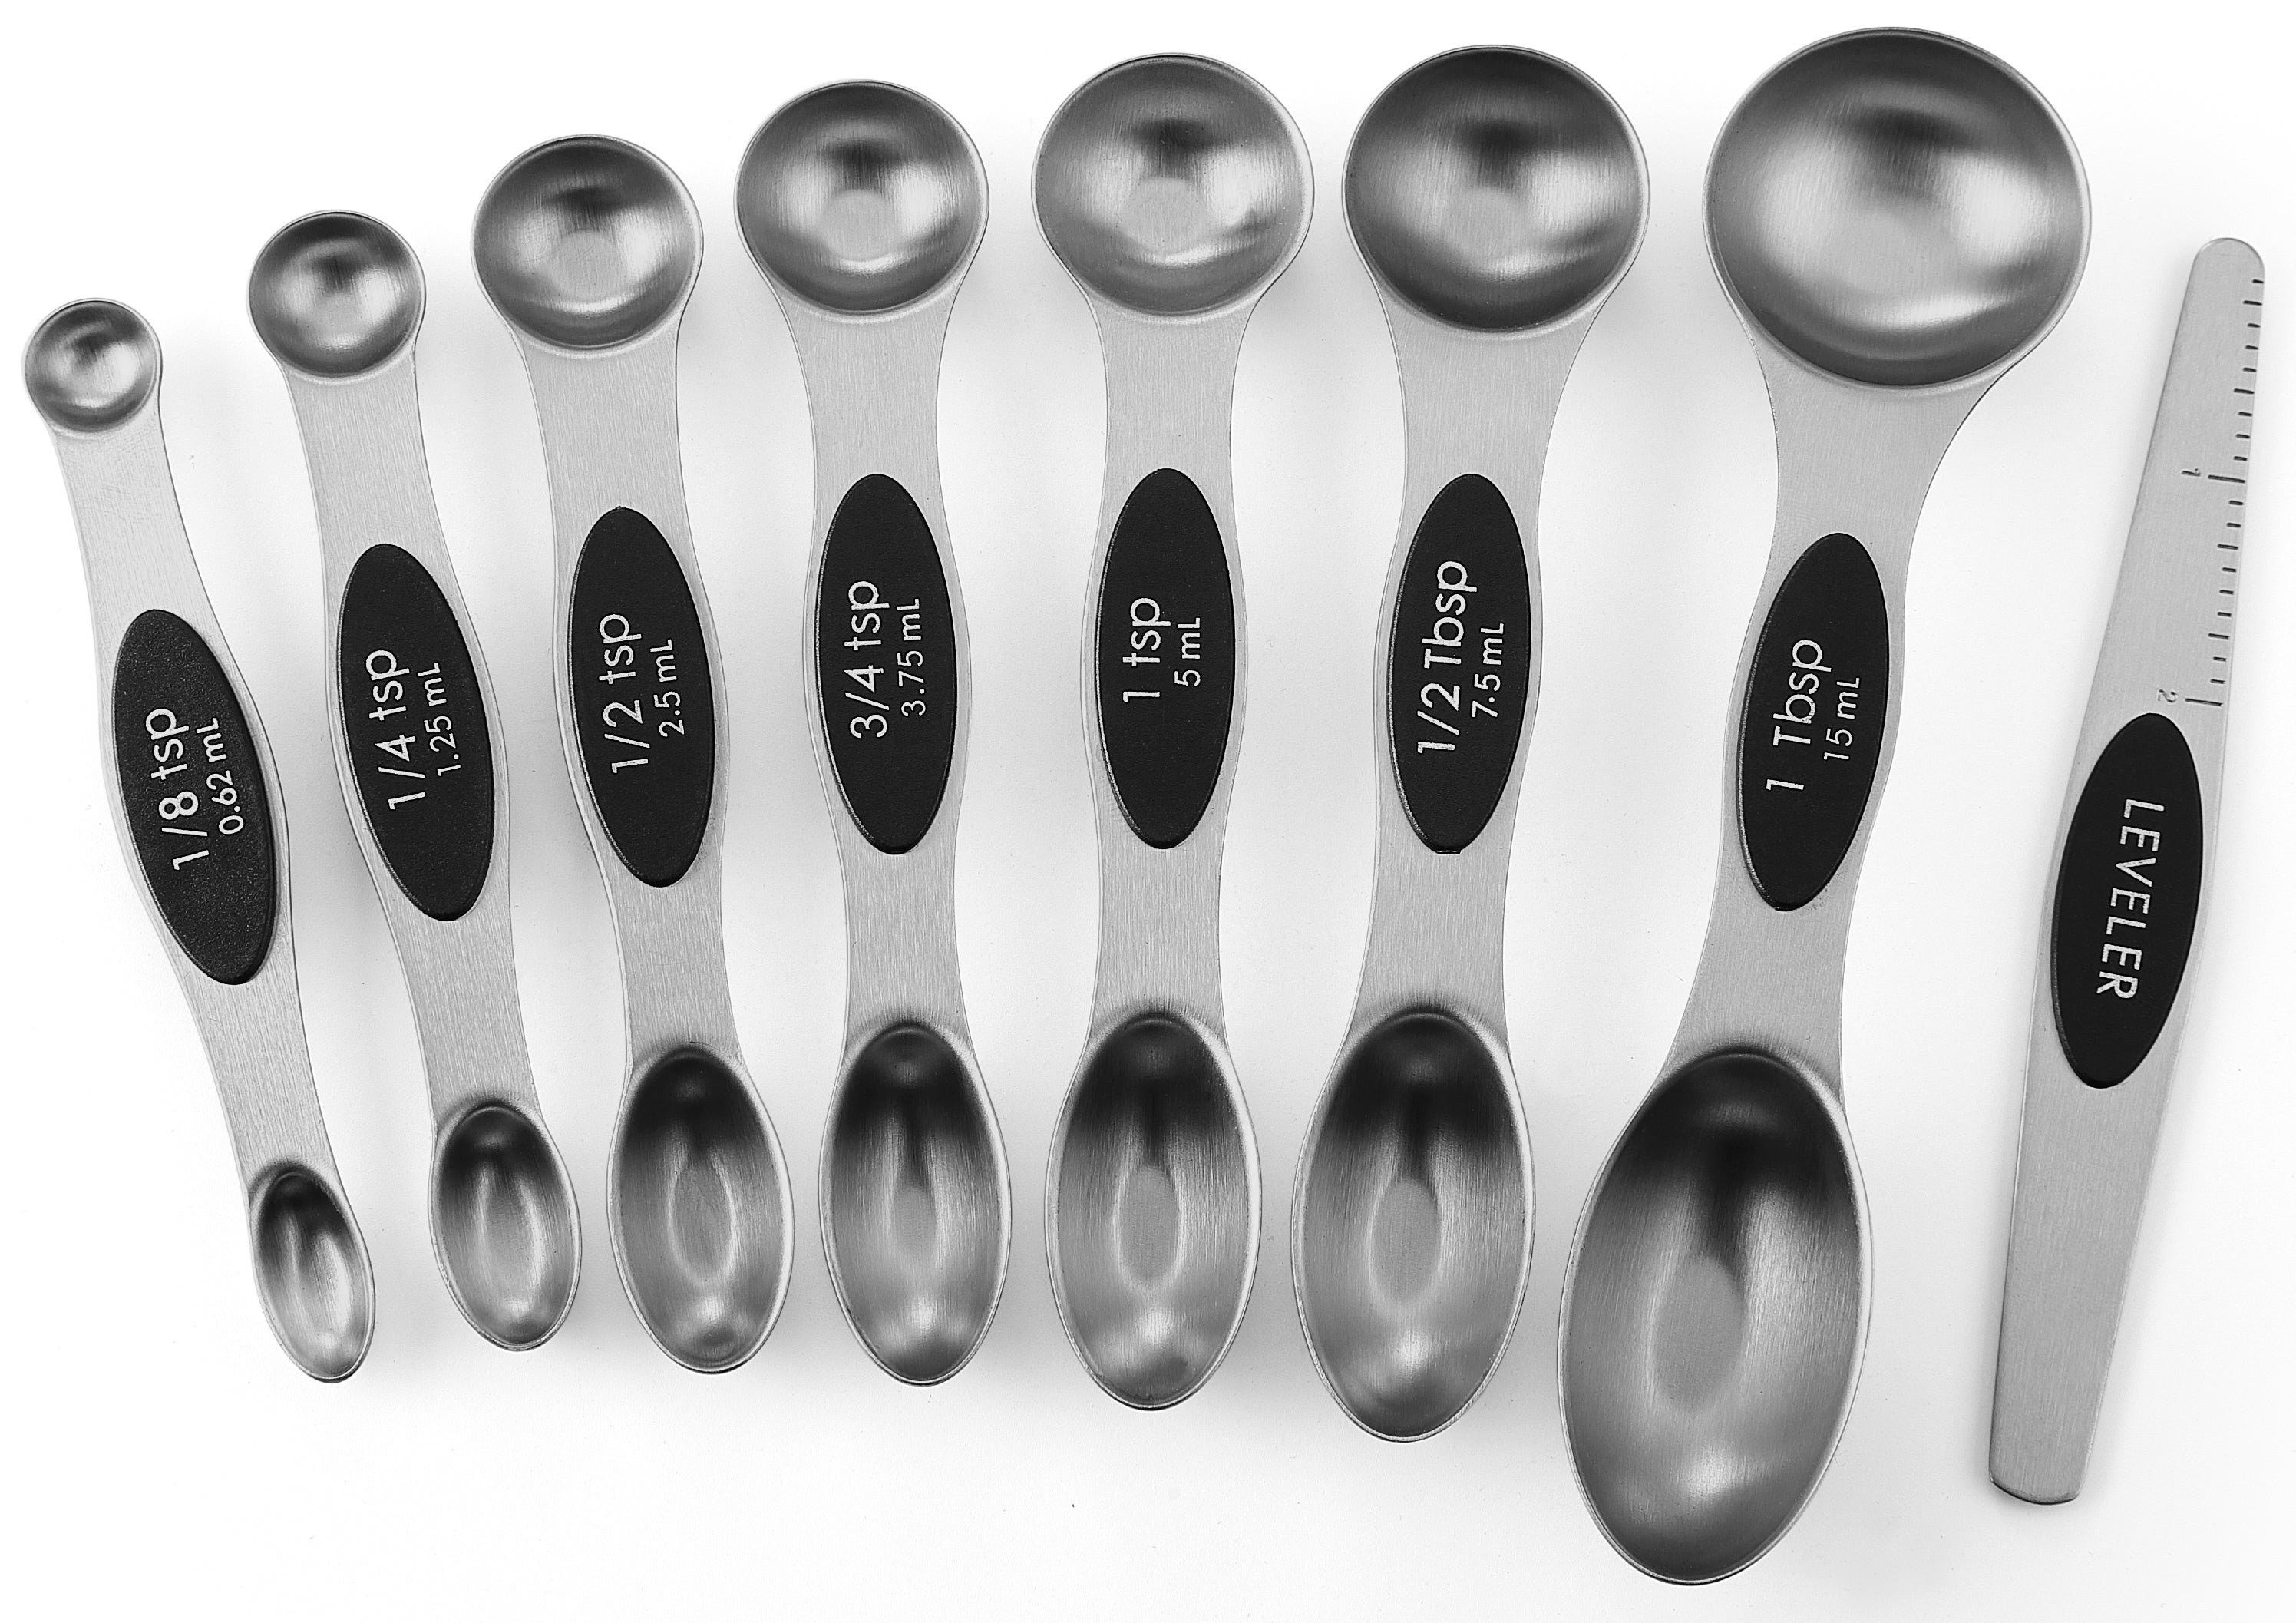 Spring Chef Measuring Cups and Spoons Stainless Steel 8 Piece Set Oval